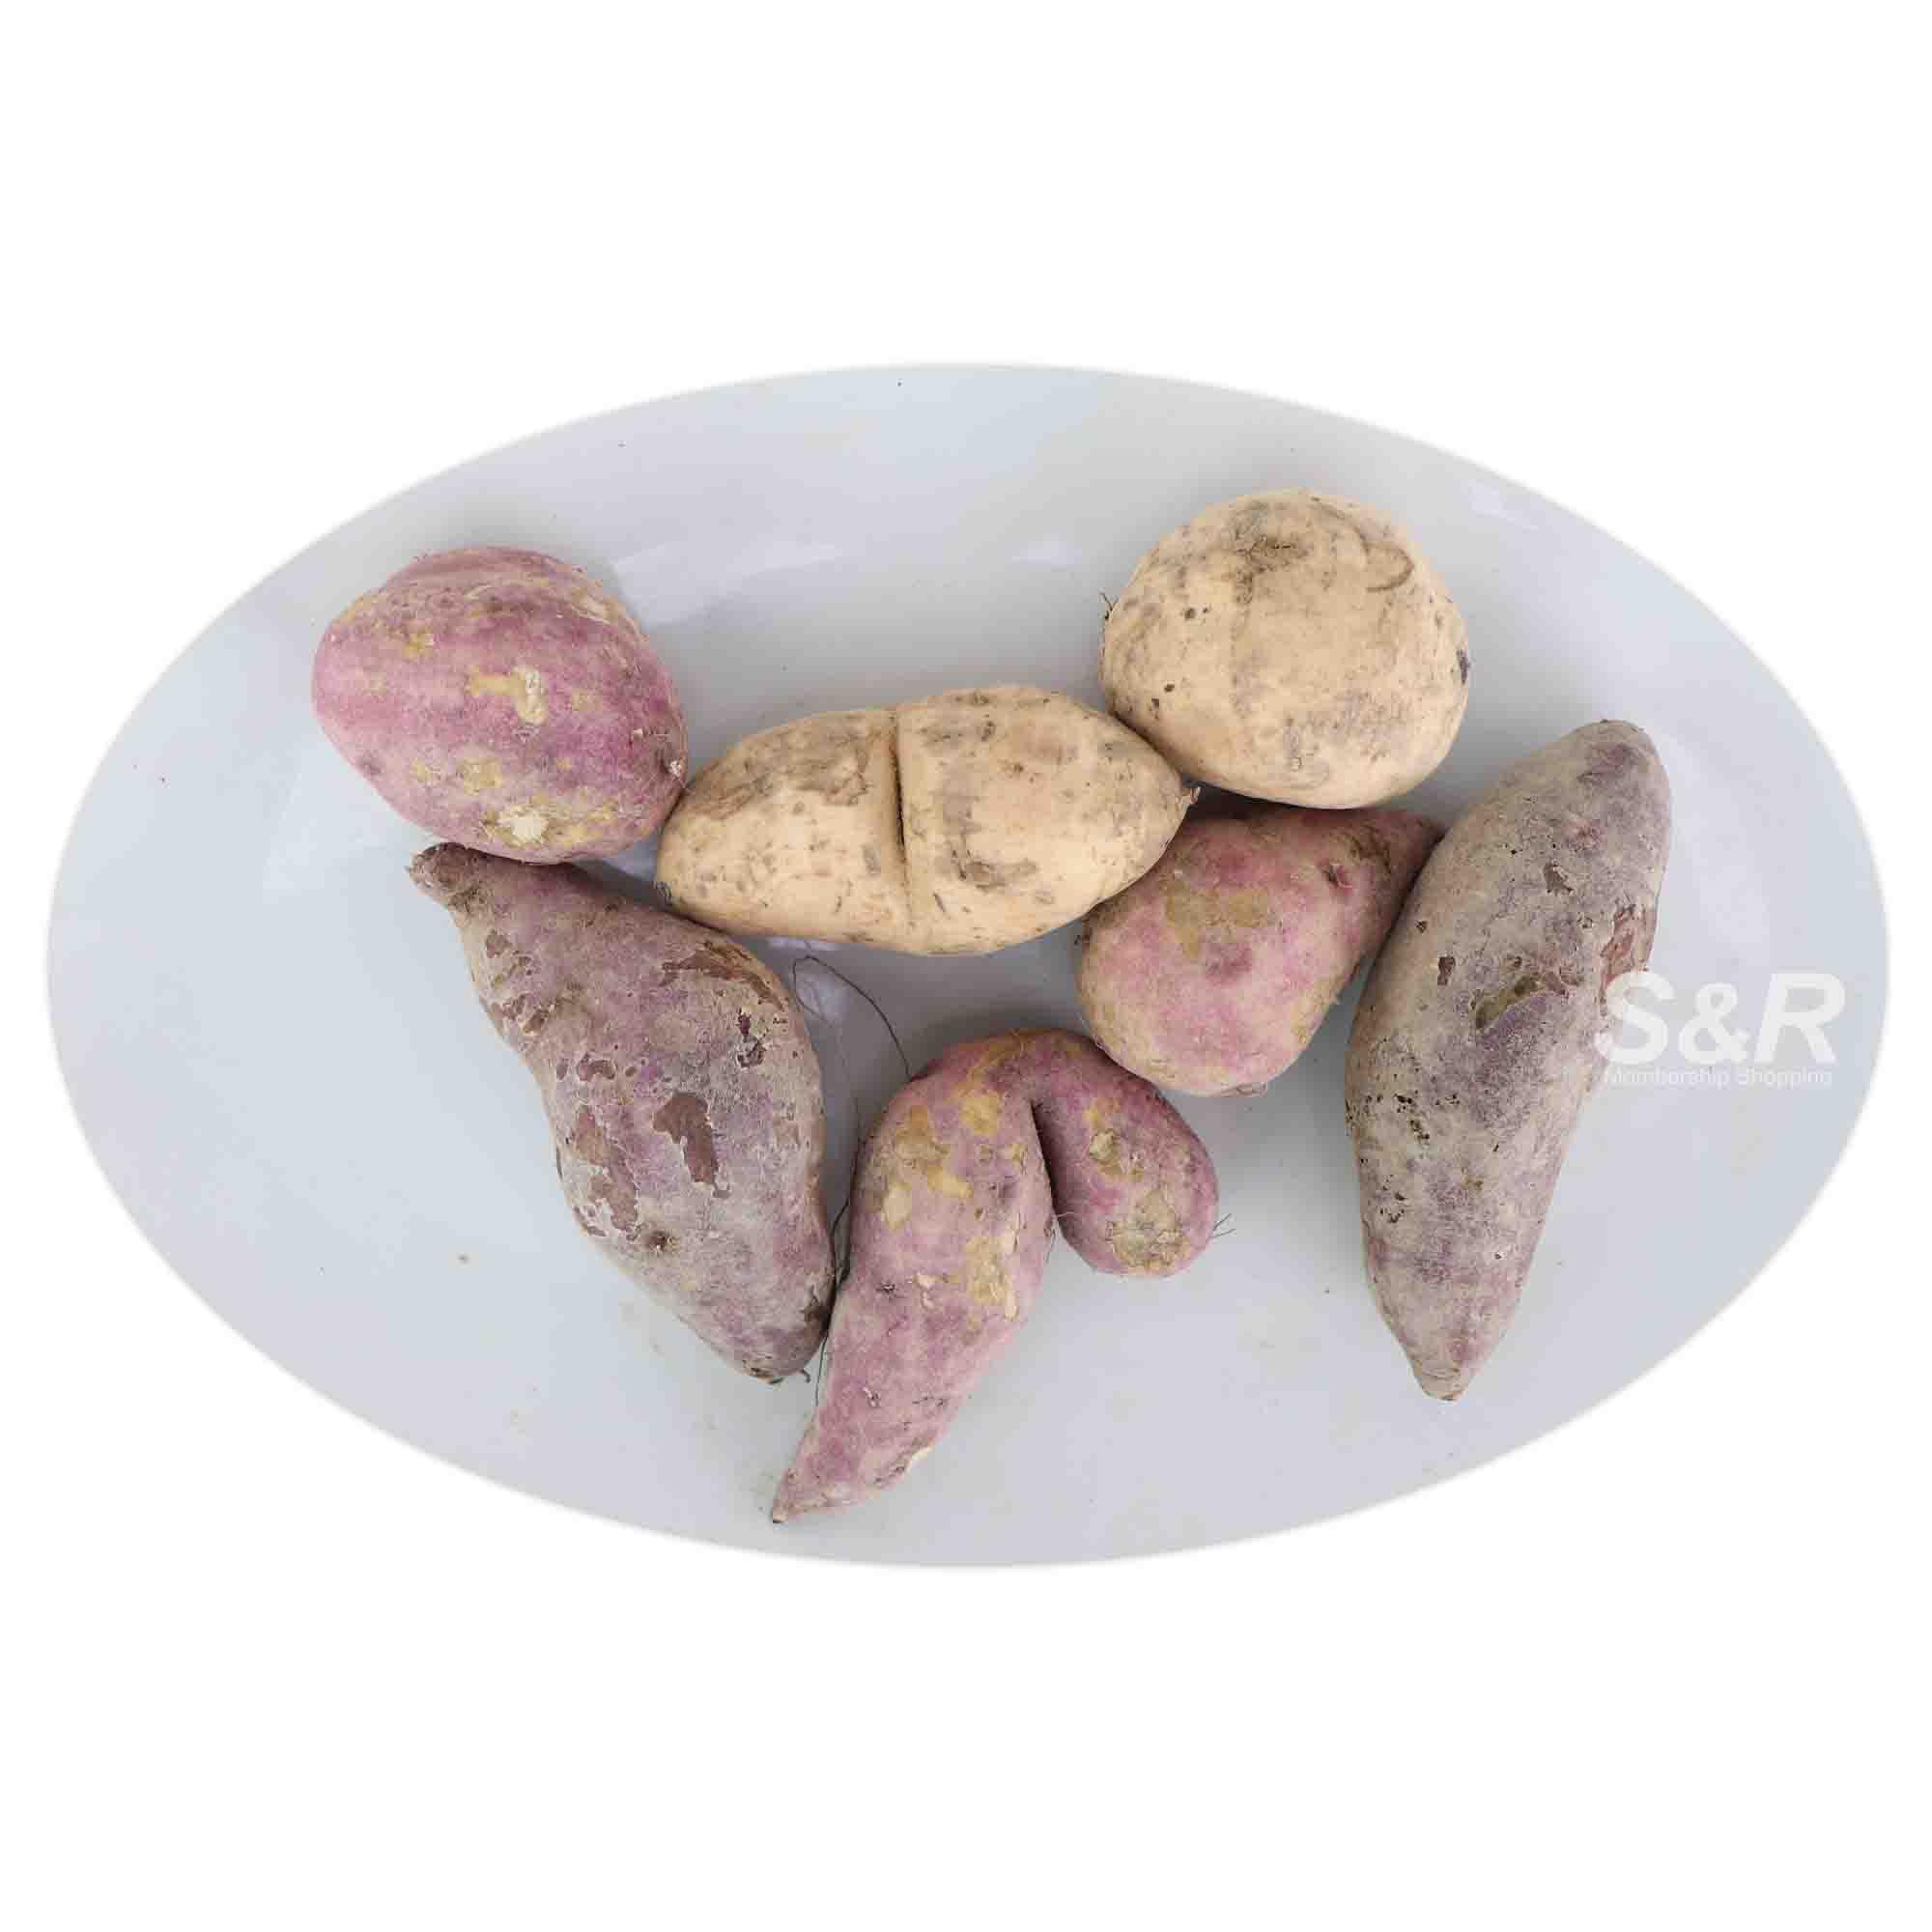 S&R Assorted Sweet Potato approx. 1.5kg